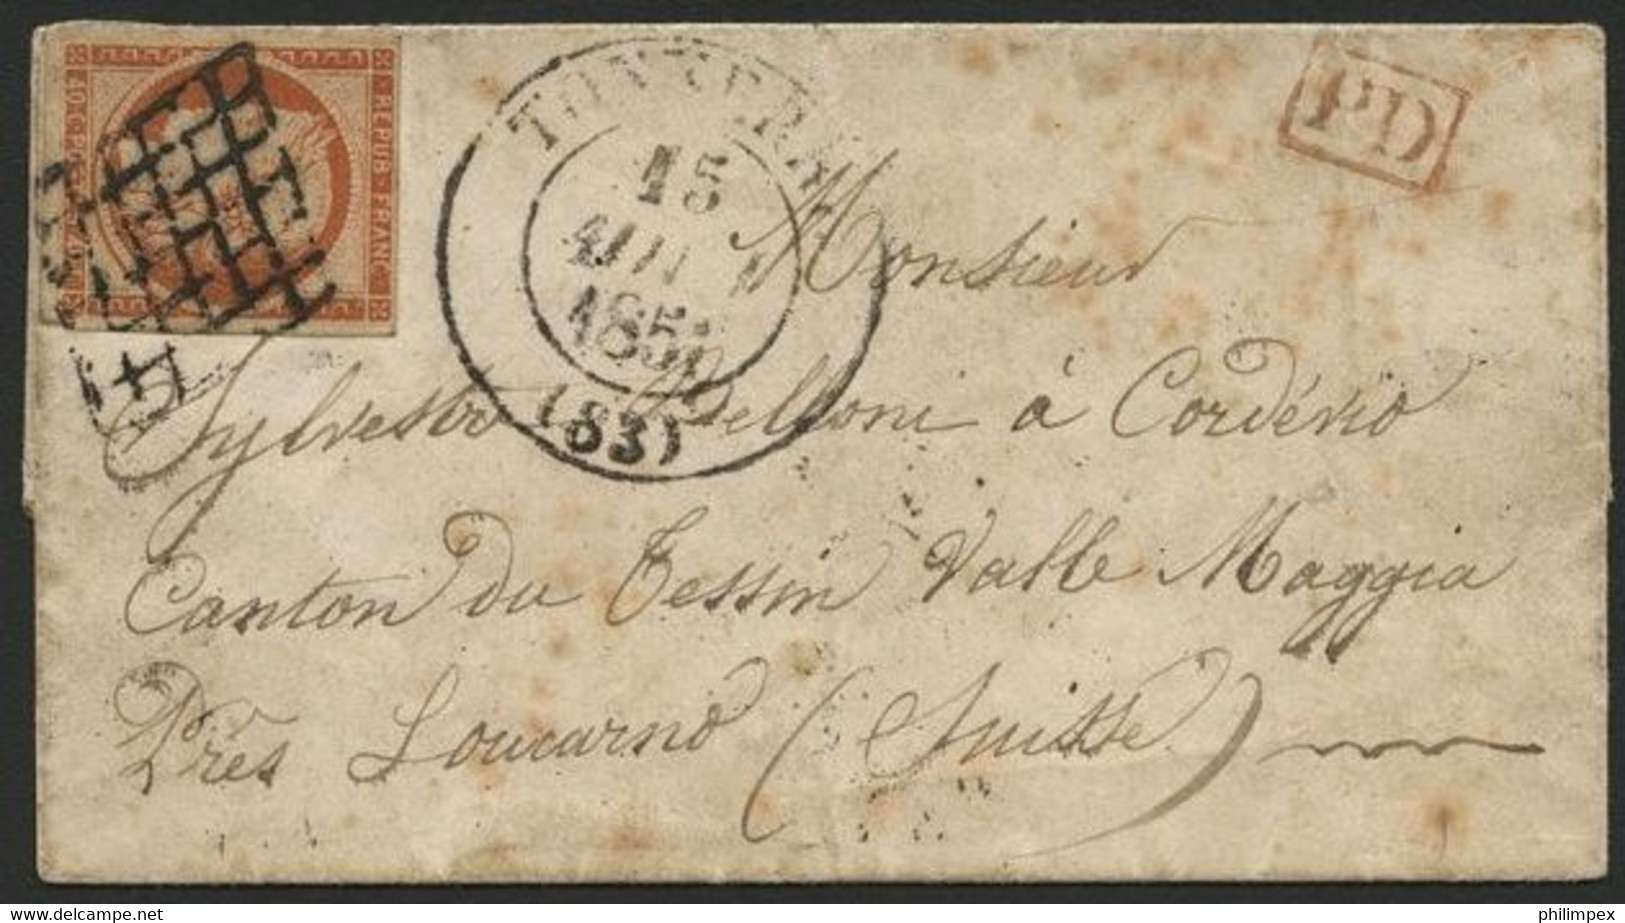 FRANCE, 40 CENTIMES INTERESTING LETTER FROM TONNERRE TO CODERIO 1851 - RARE USE ABROAD! - 1849-1850 Ceres